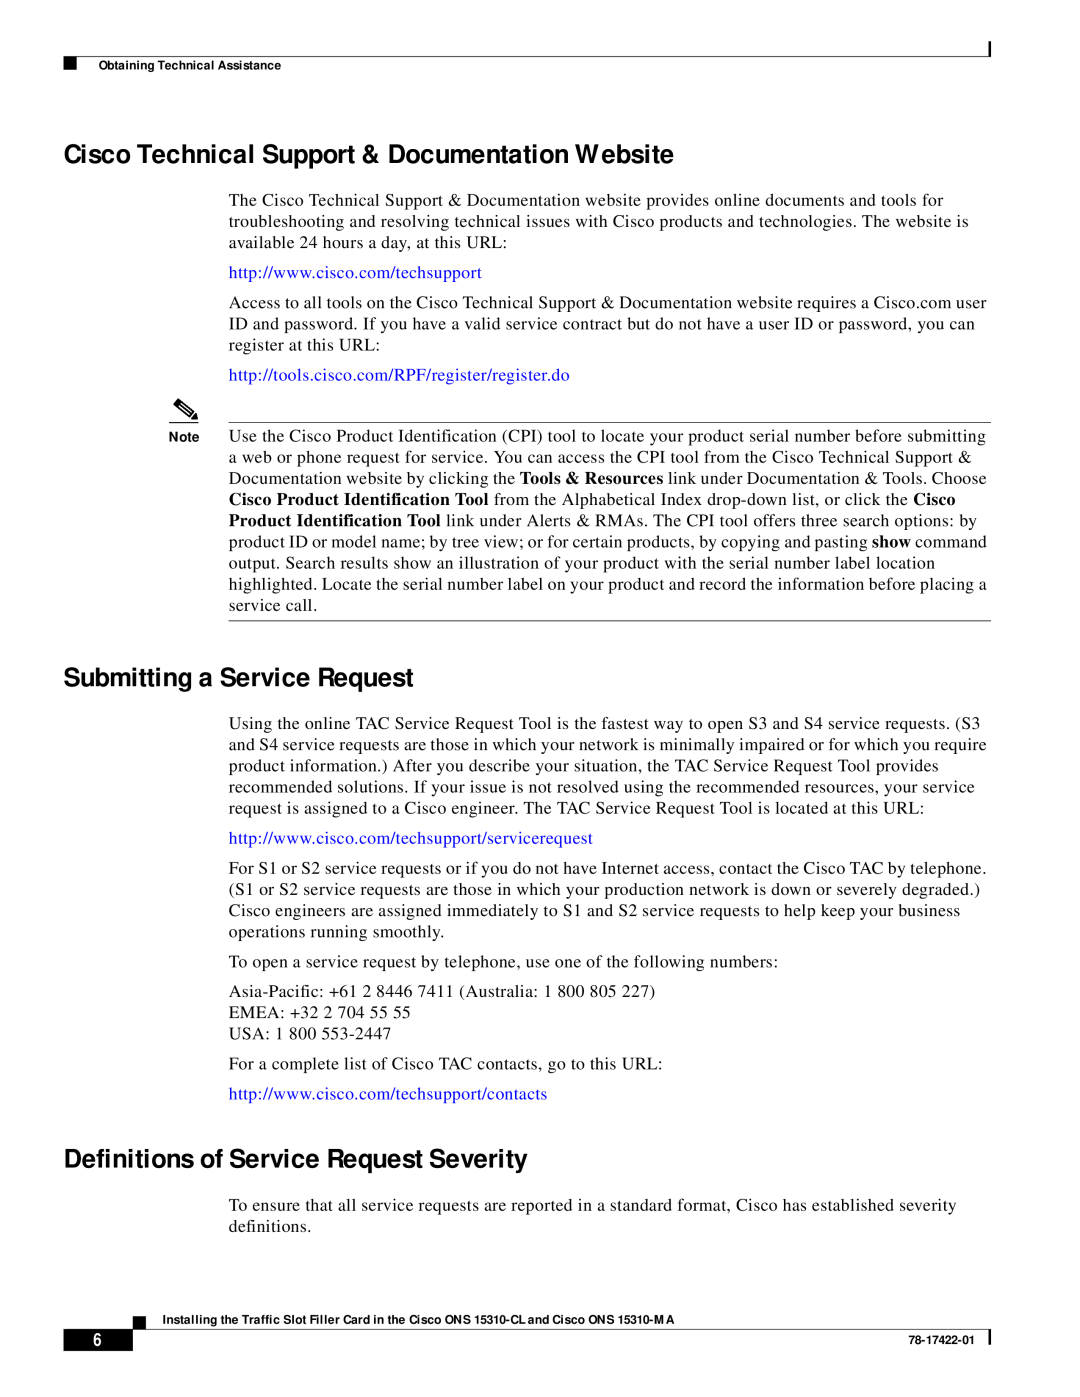 Cisco Systems 15310-MA, 15310-CL Cisco Technical Support & Documentation Website, Submitting a Service Request 